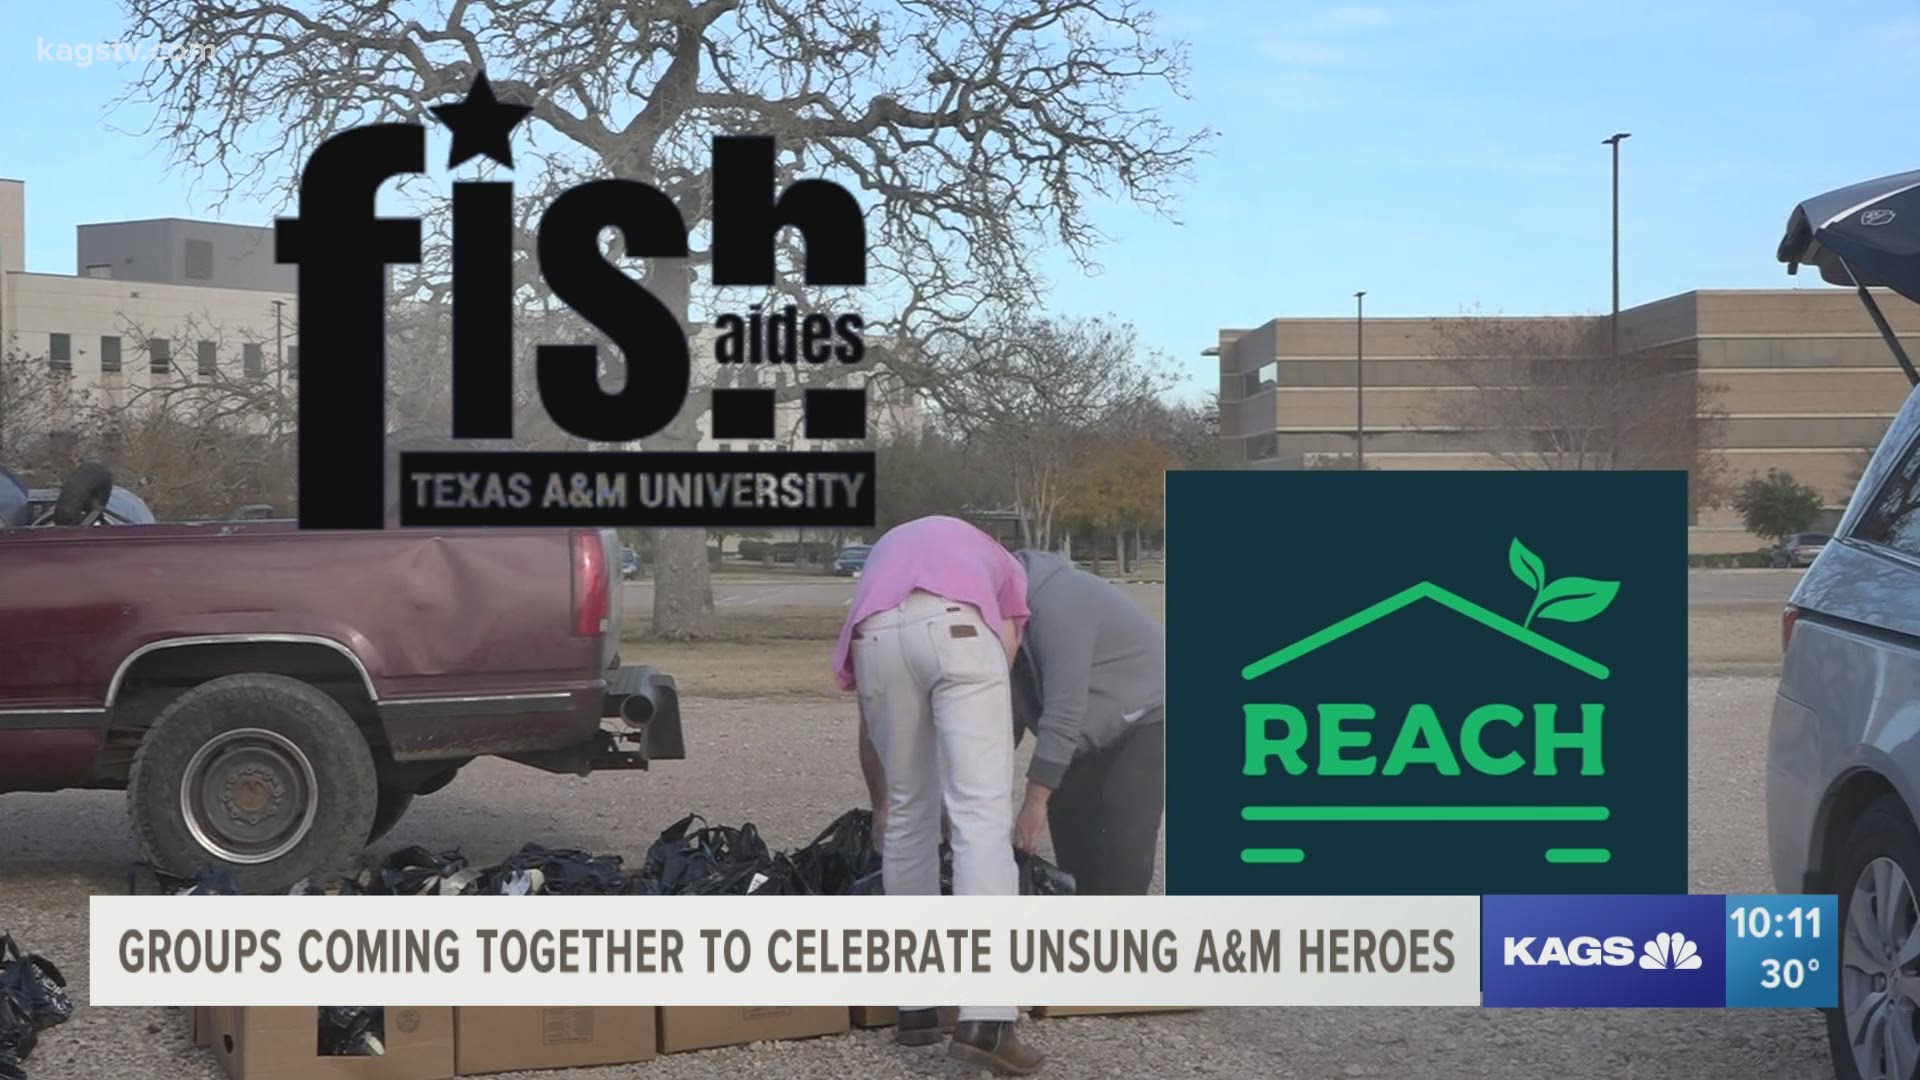 Fish Aides and REACH Project will put together a COVID-19 adapted Custodian Banquet. It is in an effort to say, 'Thank you' to these detrimental Aggies.